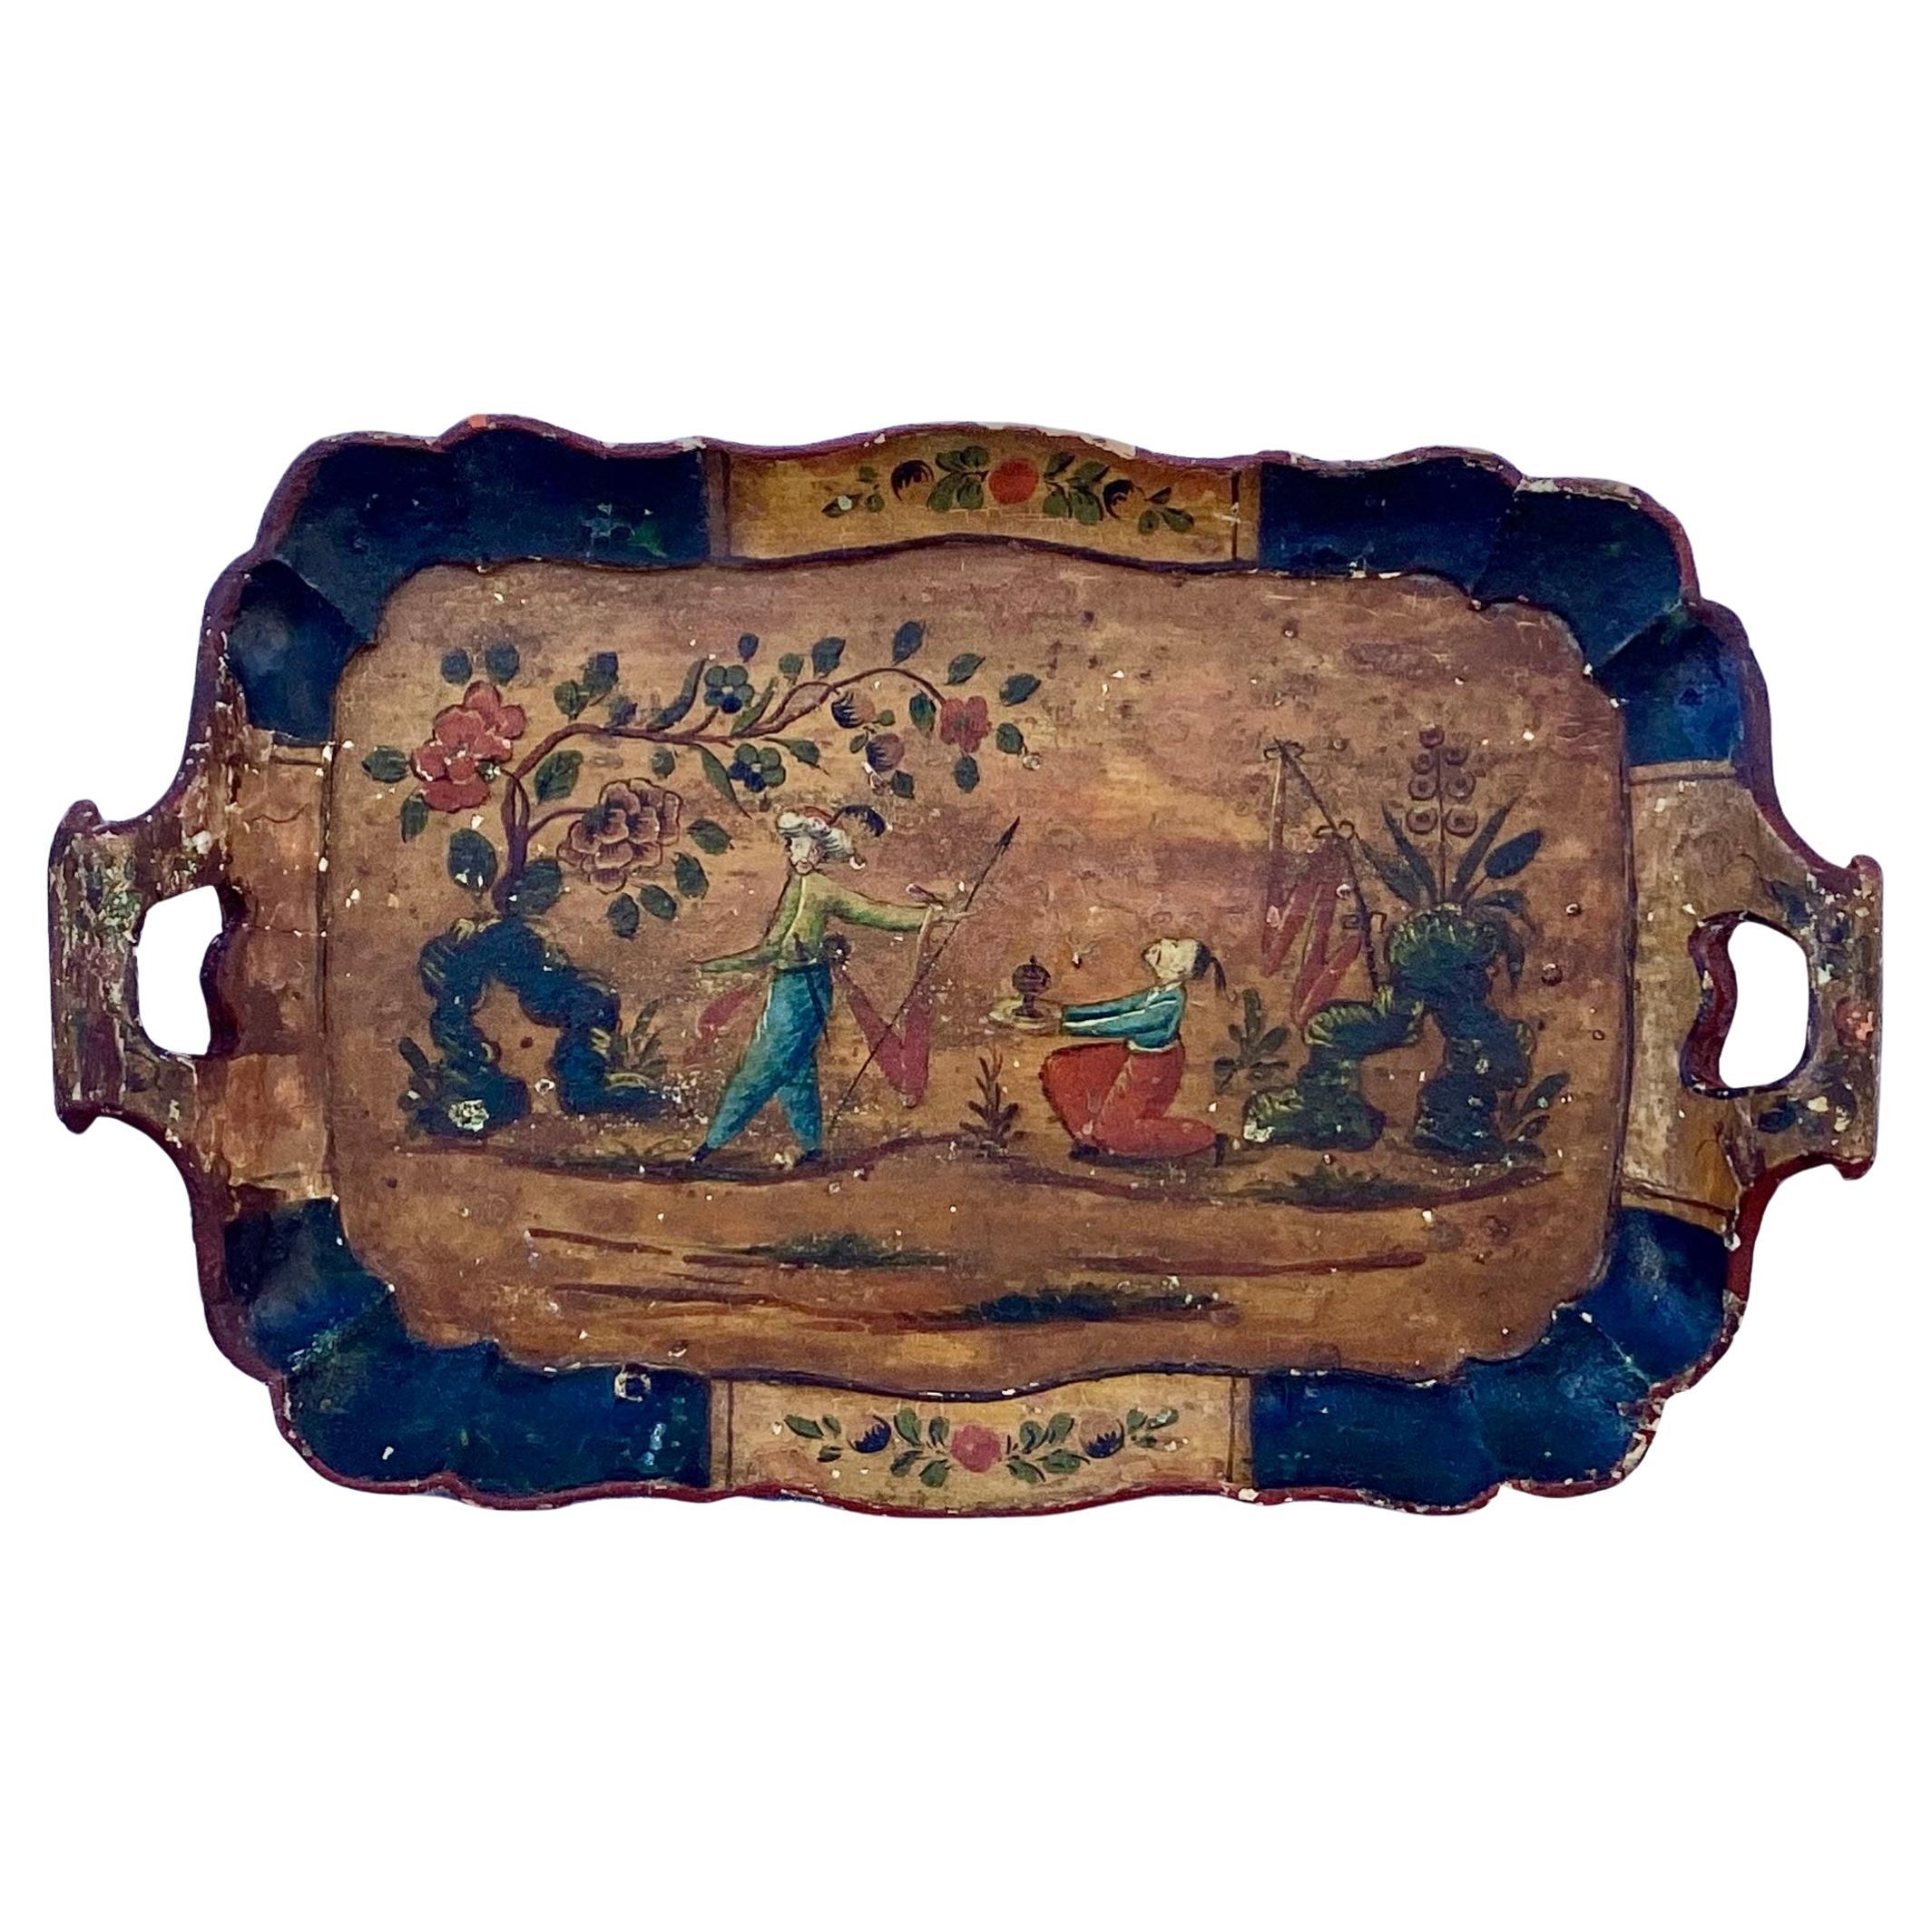 Large 18th century wooden Venetian tray with Chinoiserie decoration. Florals and Chinese figures in colors of red, green on dark wood background.